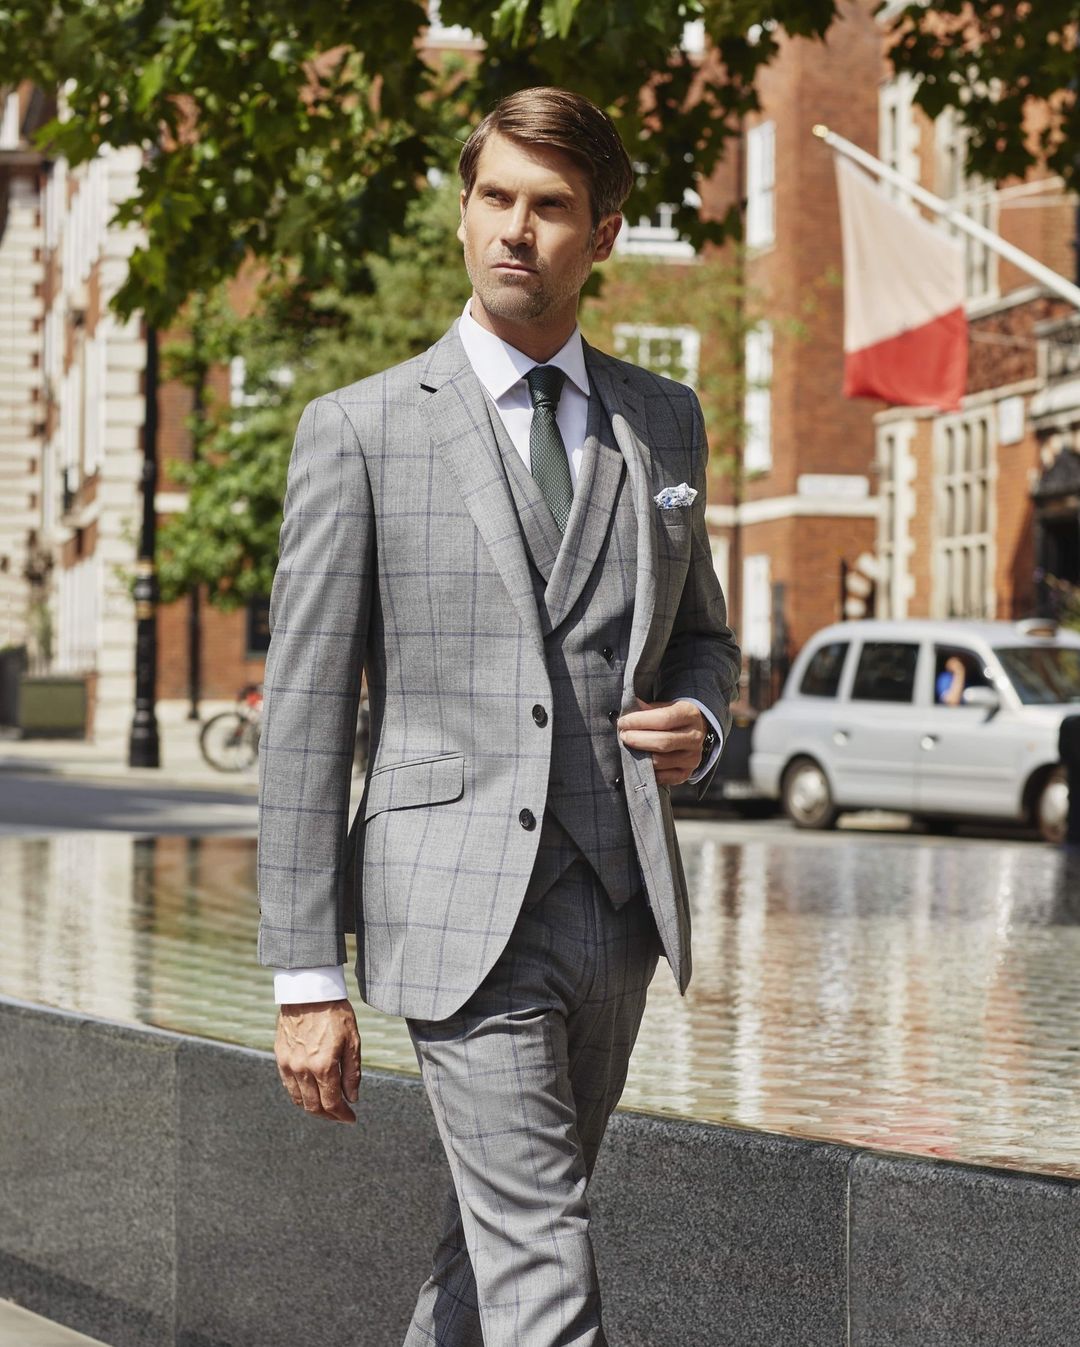 M&S has focused more on smart separates rather than suits